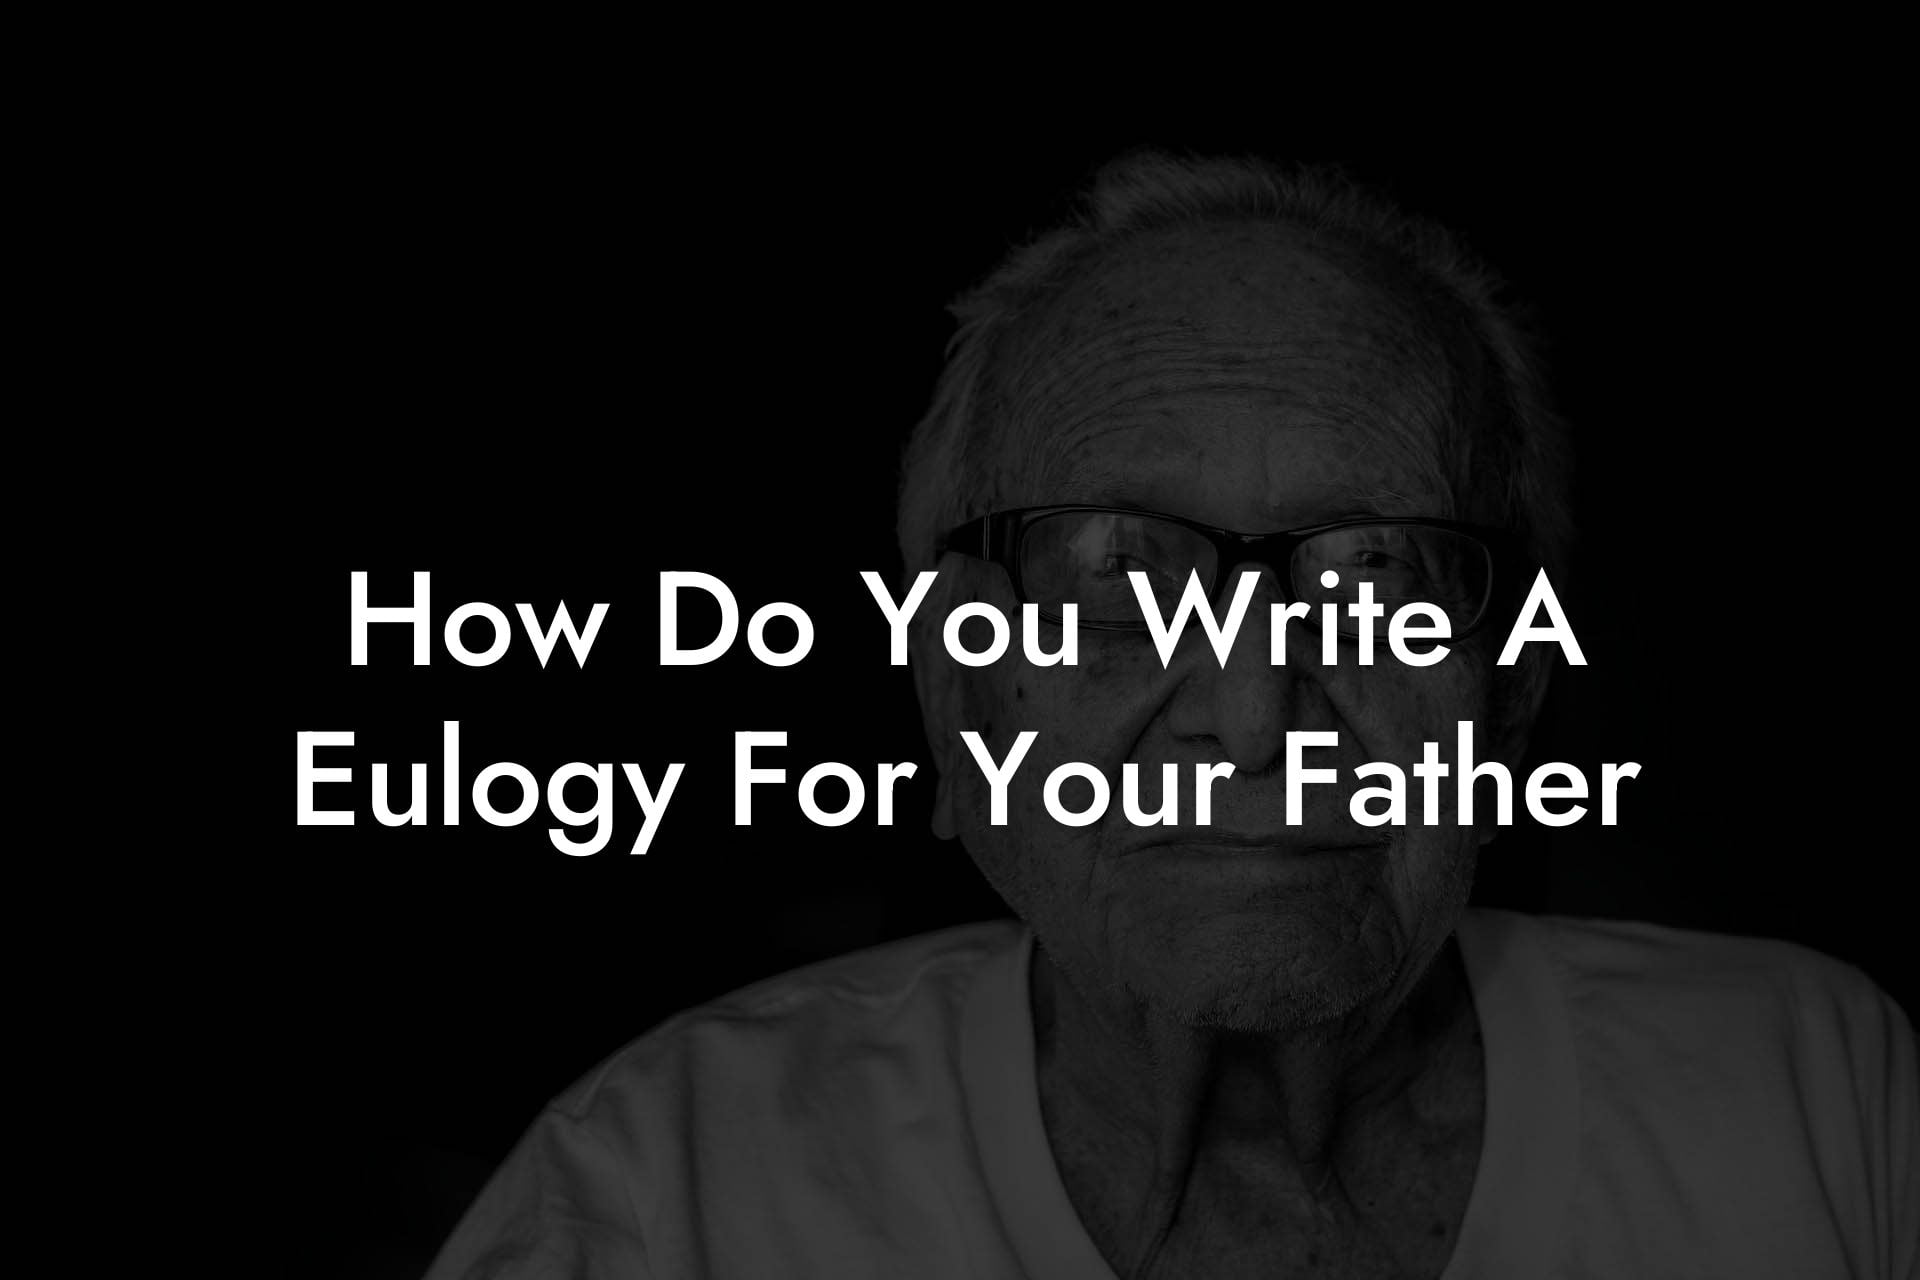 How Do You Write A Eulogy For Your Father